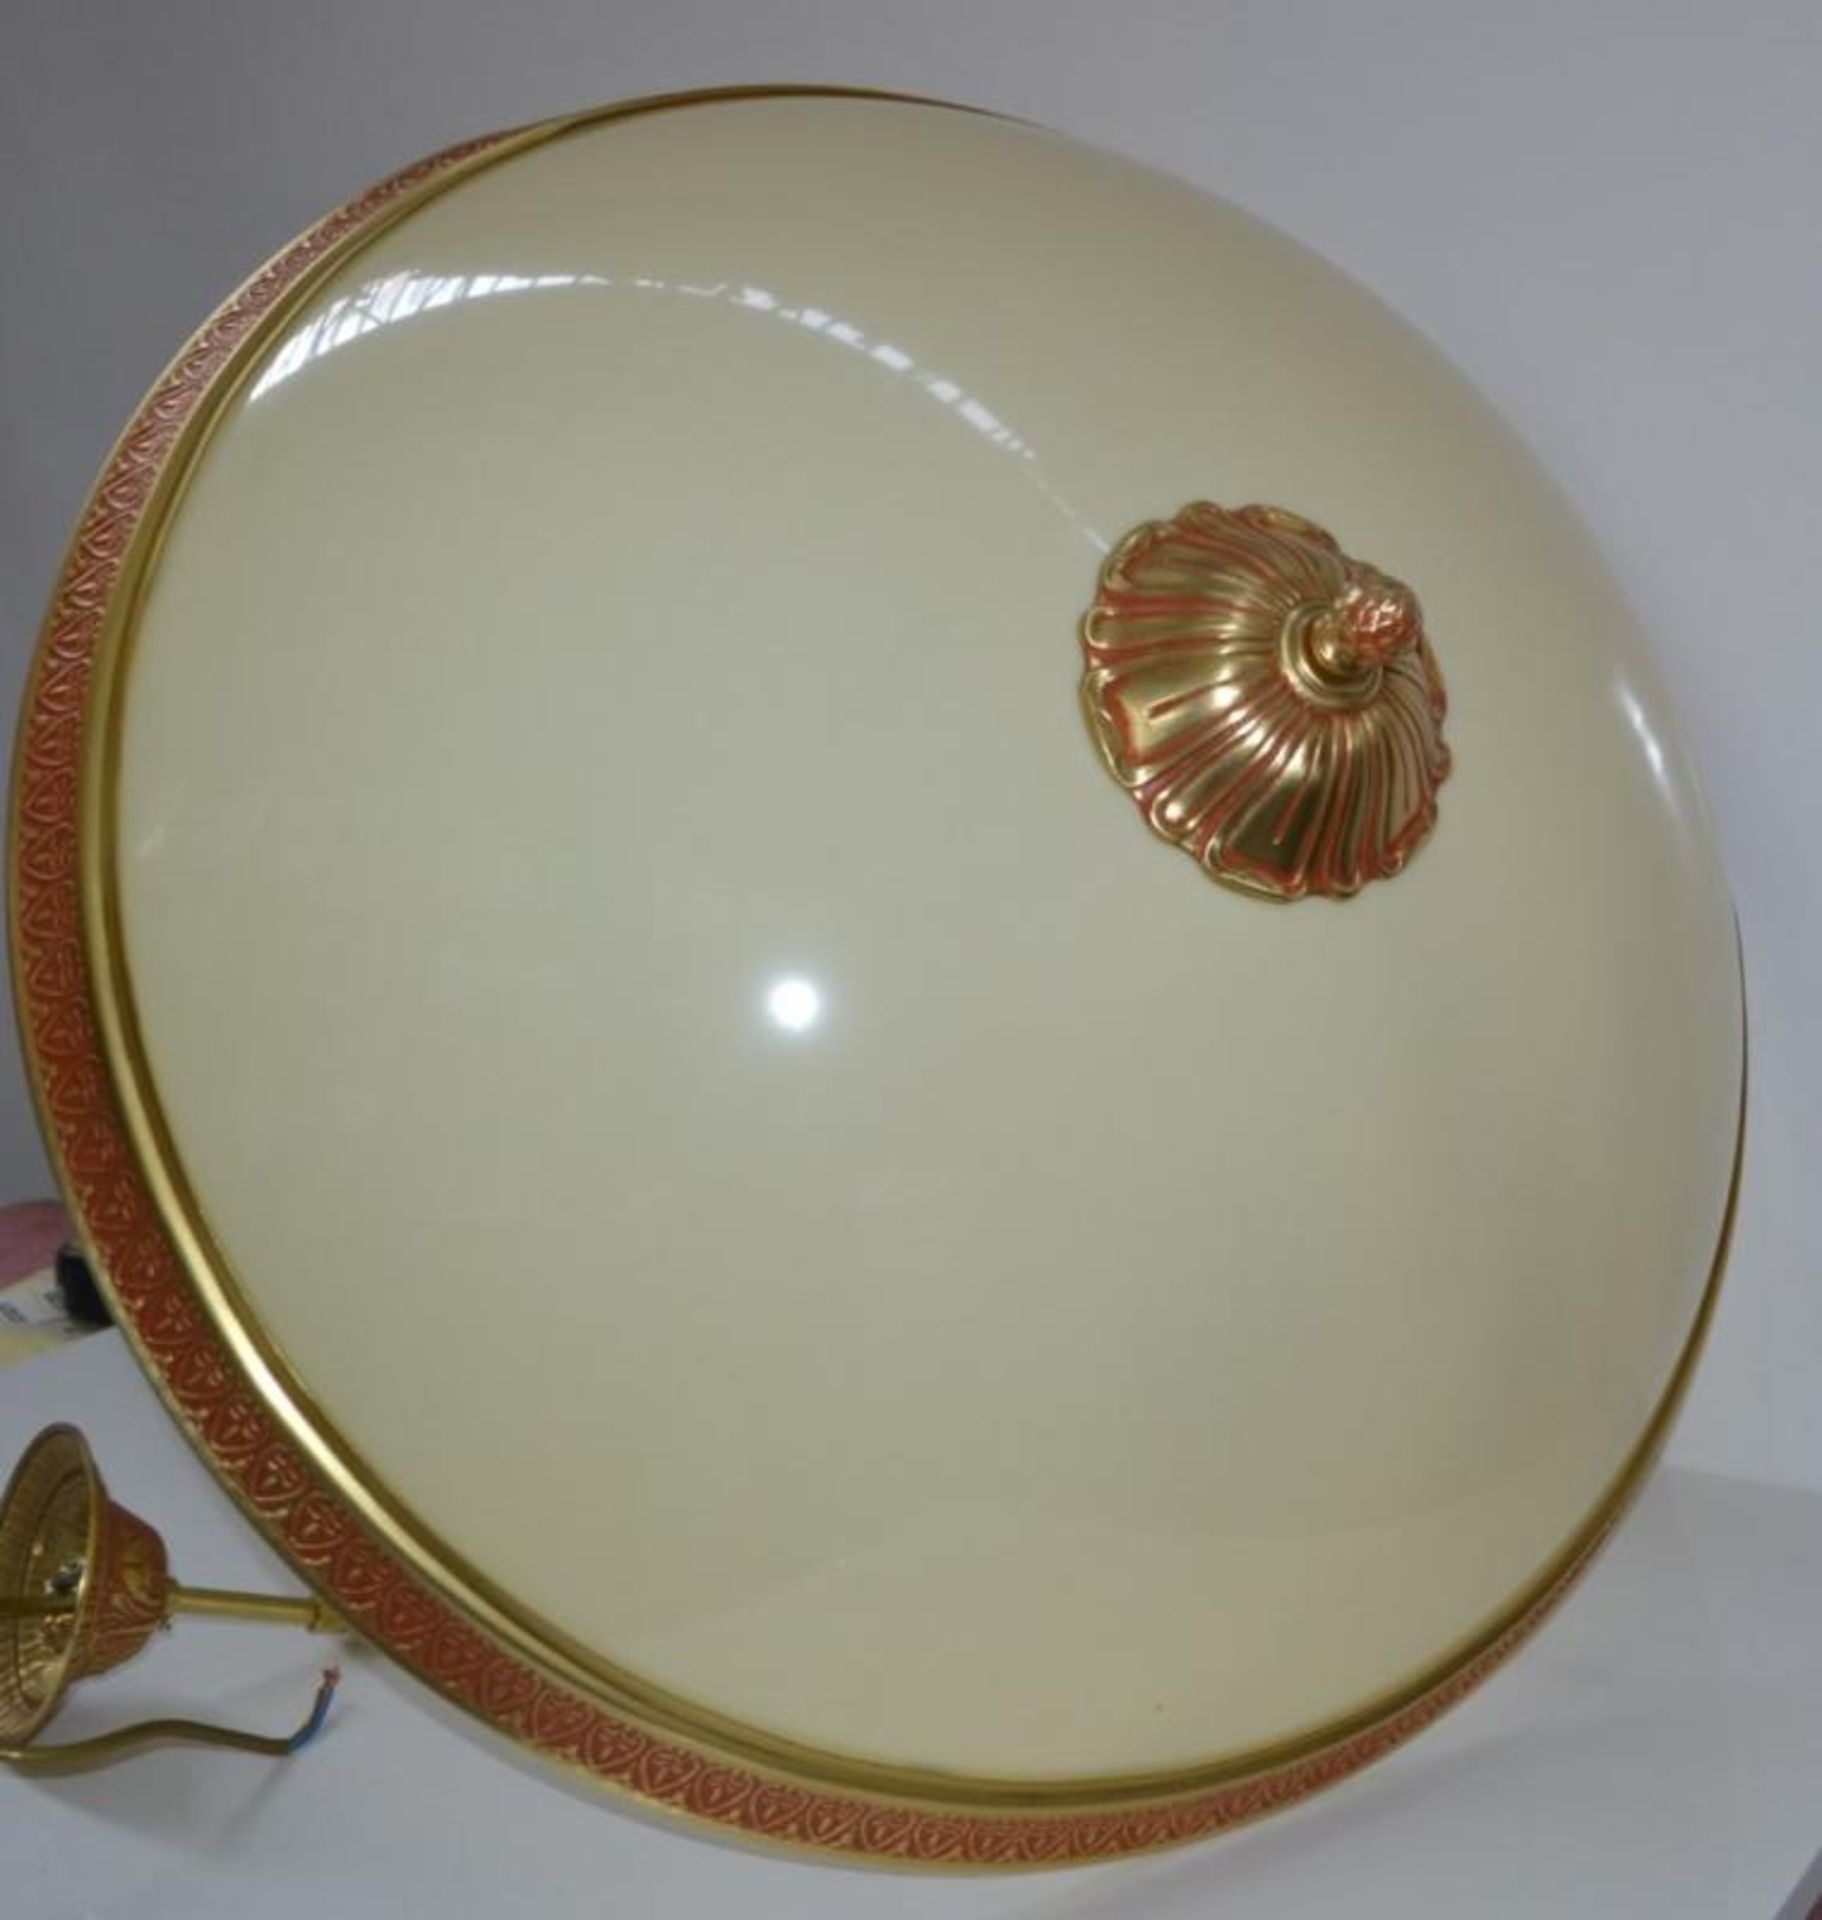 1 x Chelsom Siena Light Hanging Solid Brass With Ivory Opaque Acrylic Bowl (SI/8404/60) - New/Unuse - Image 6 of 6